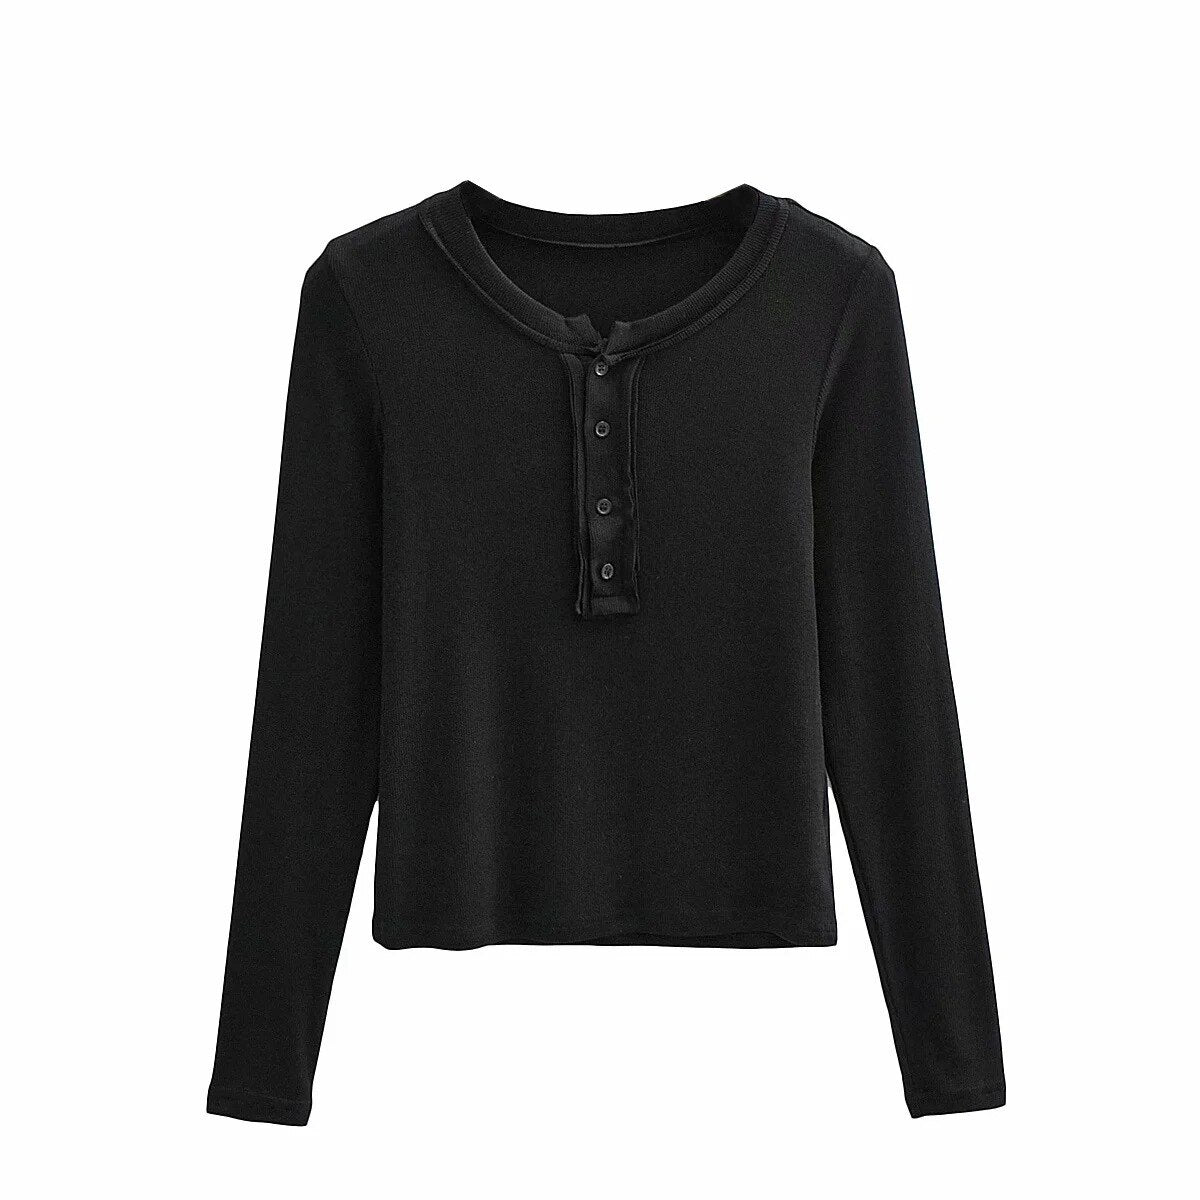 Graduation Gifts  Korean Style Slim Solid Color Bottomed Tops Half Open O-neck Long Sleeve Short Women Open Navel T-shirt Mo2s